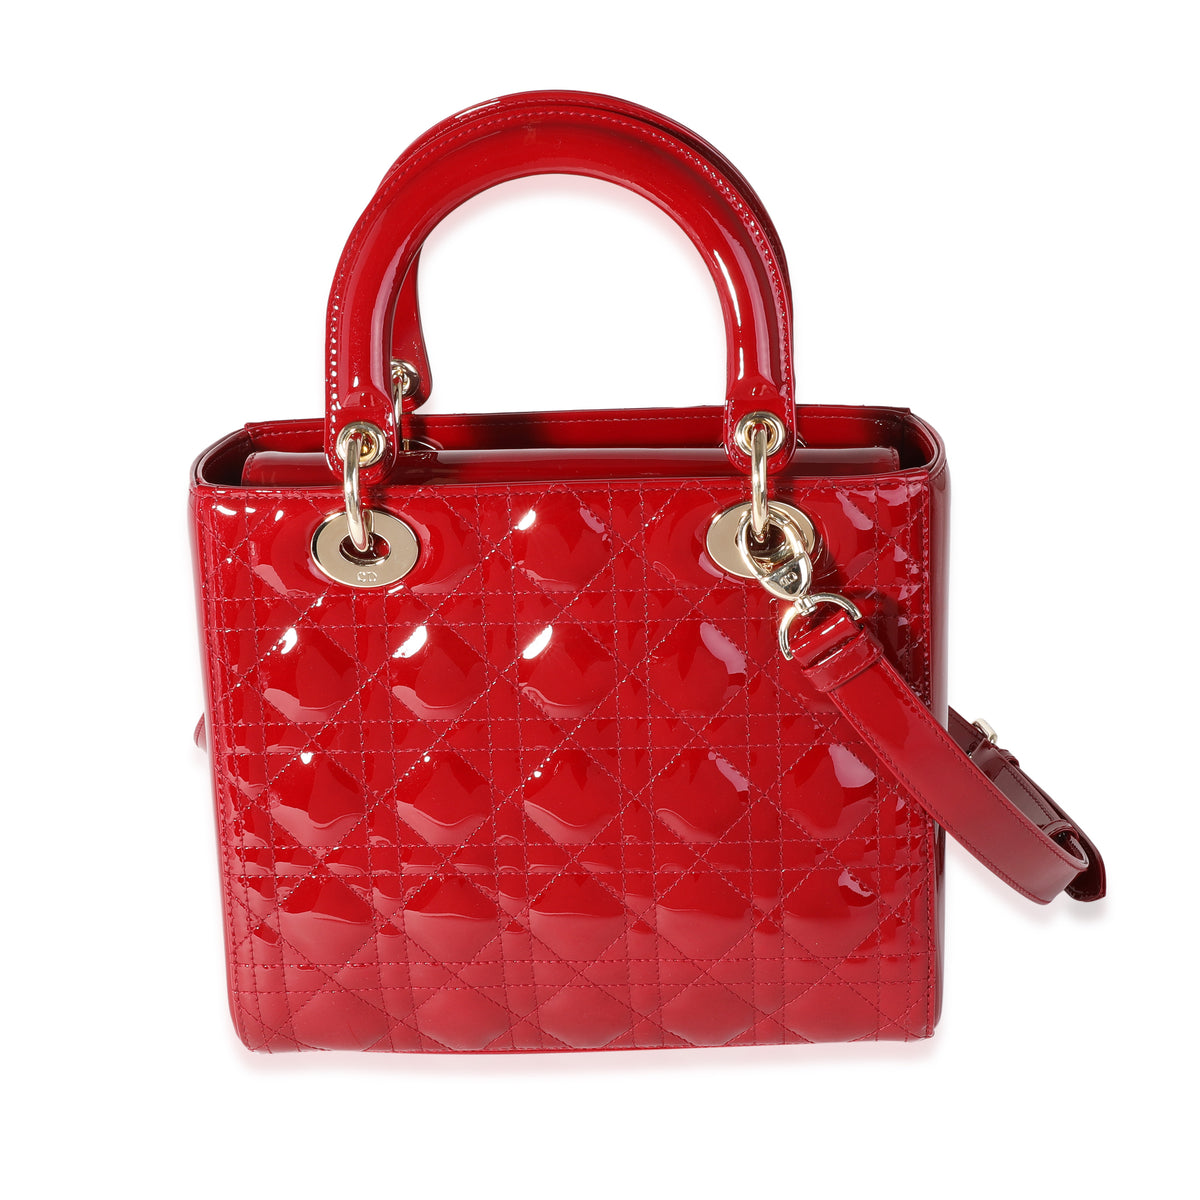 Dior Red Cannage Patent Leather Medium Lady Dior Bag